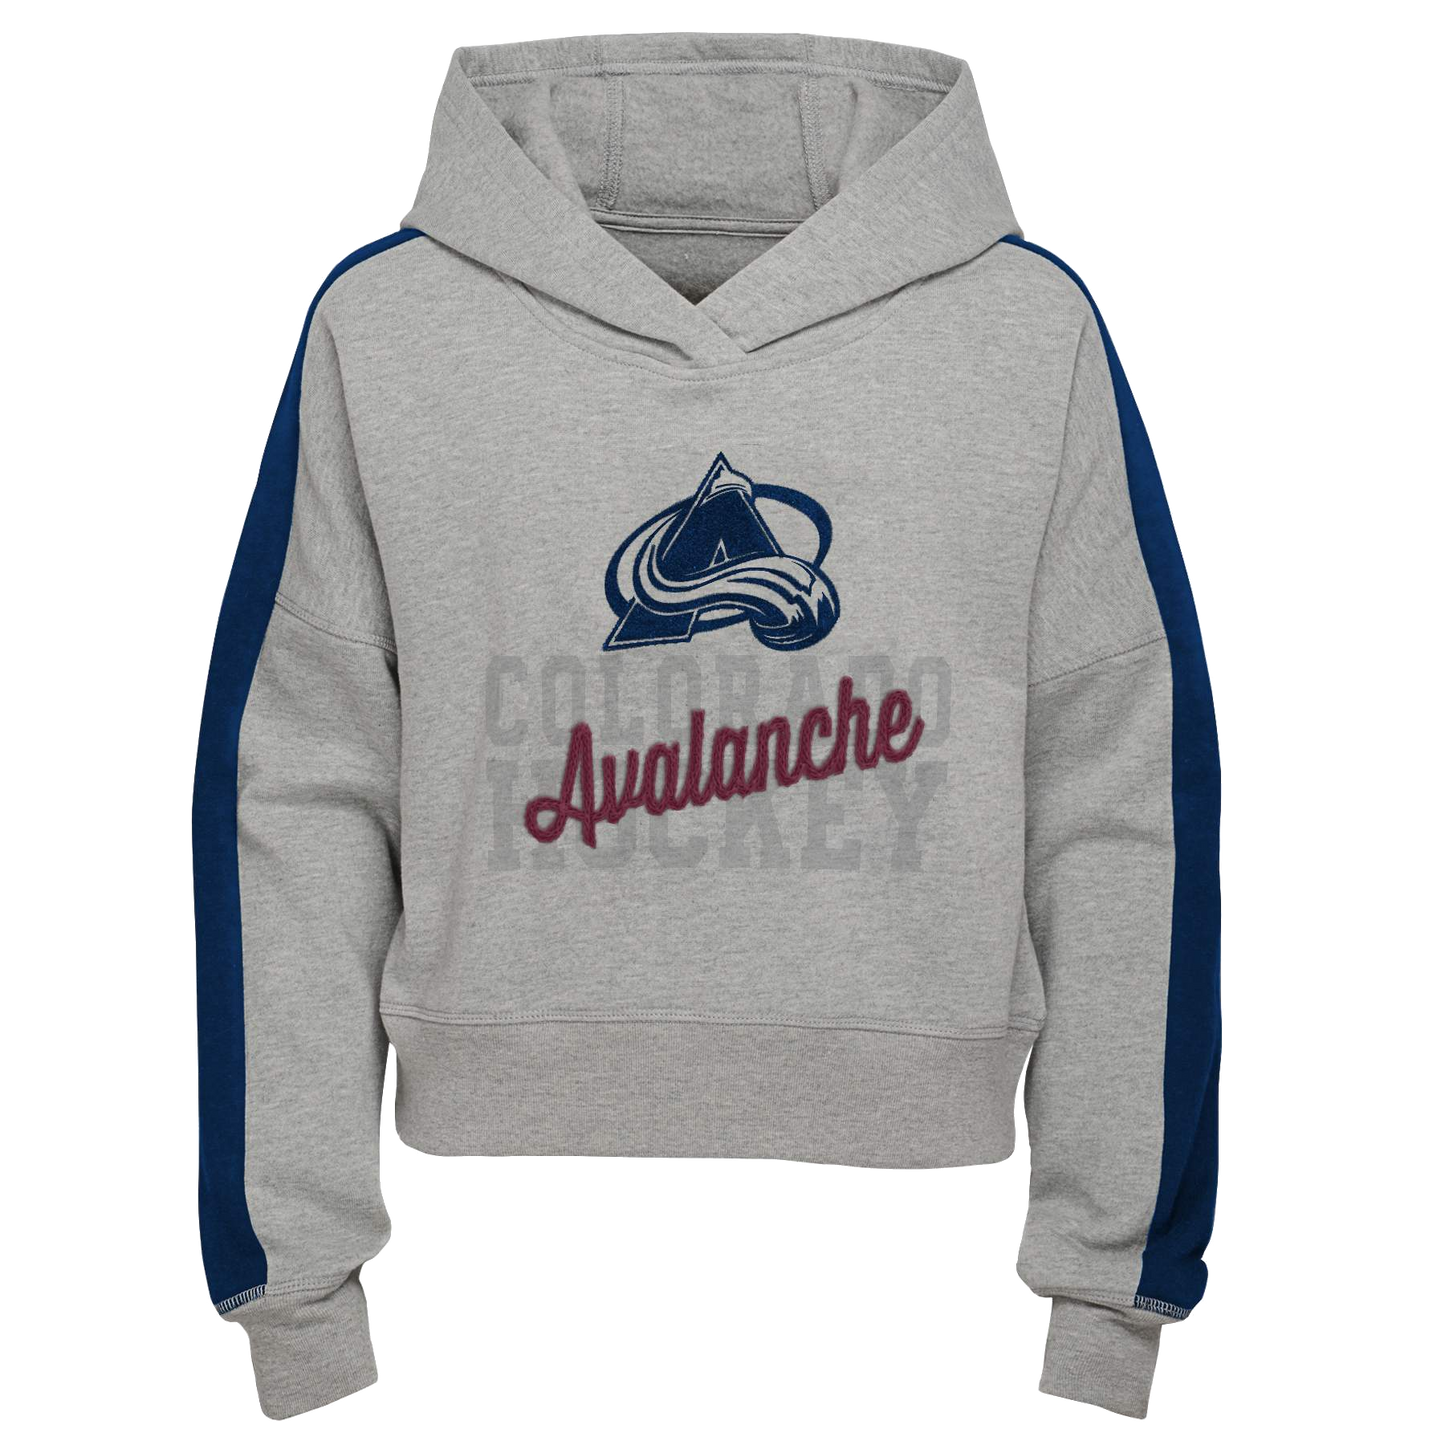 Avalanche Girls Cropped Chainstitch Hoody